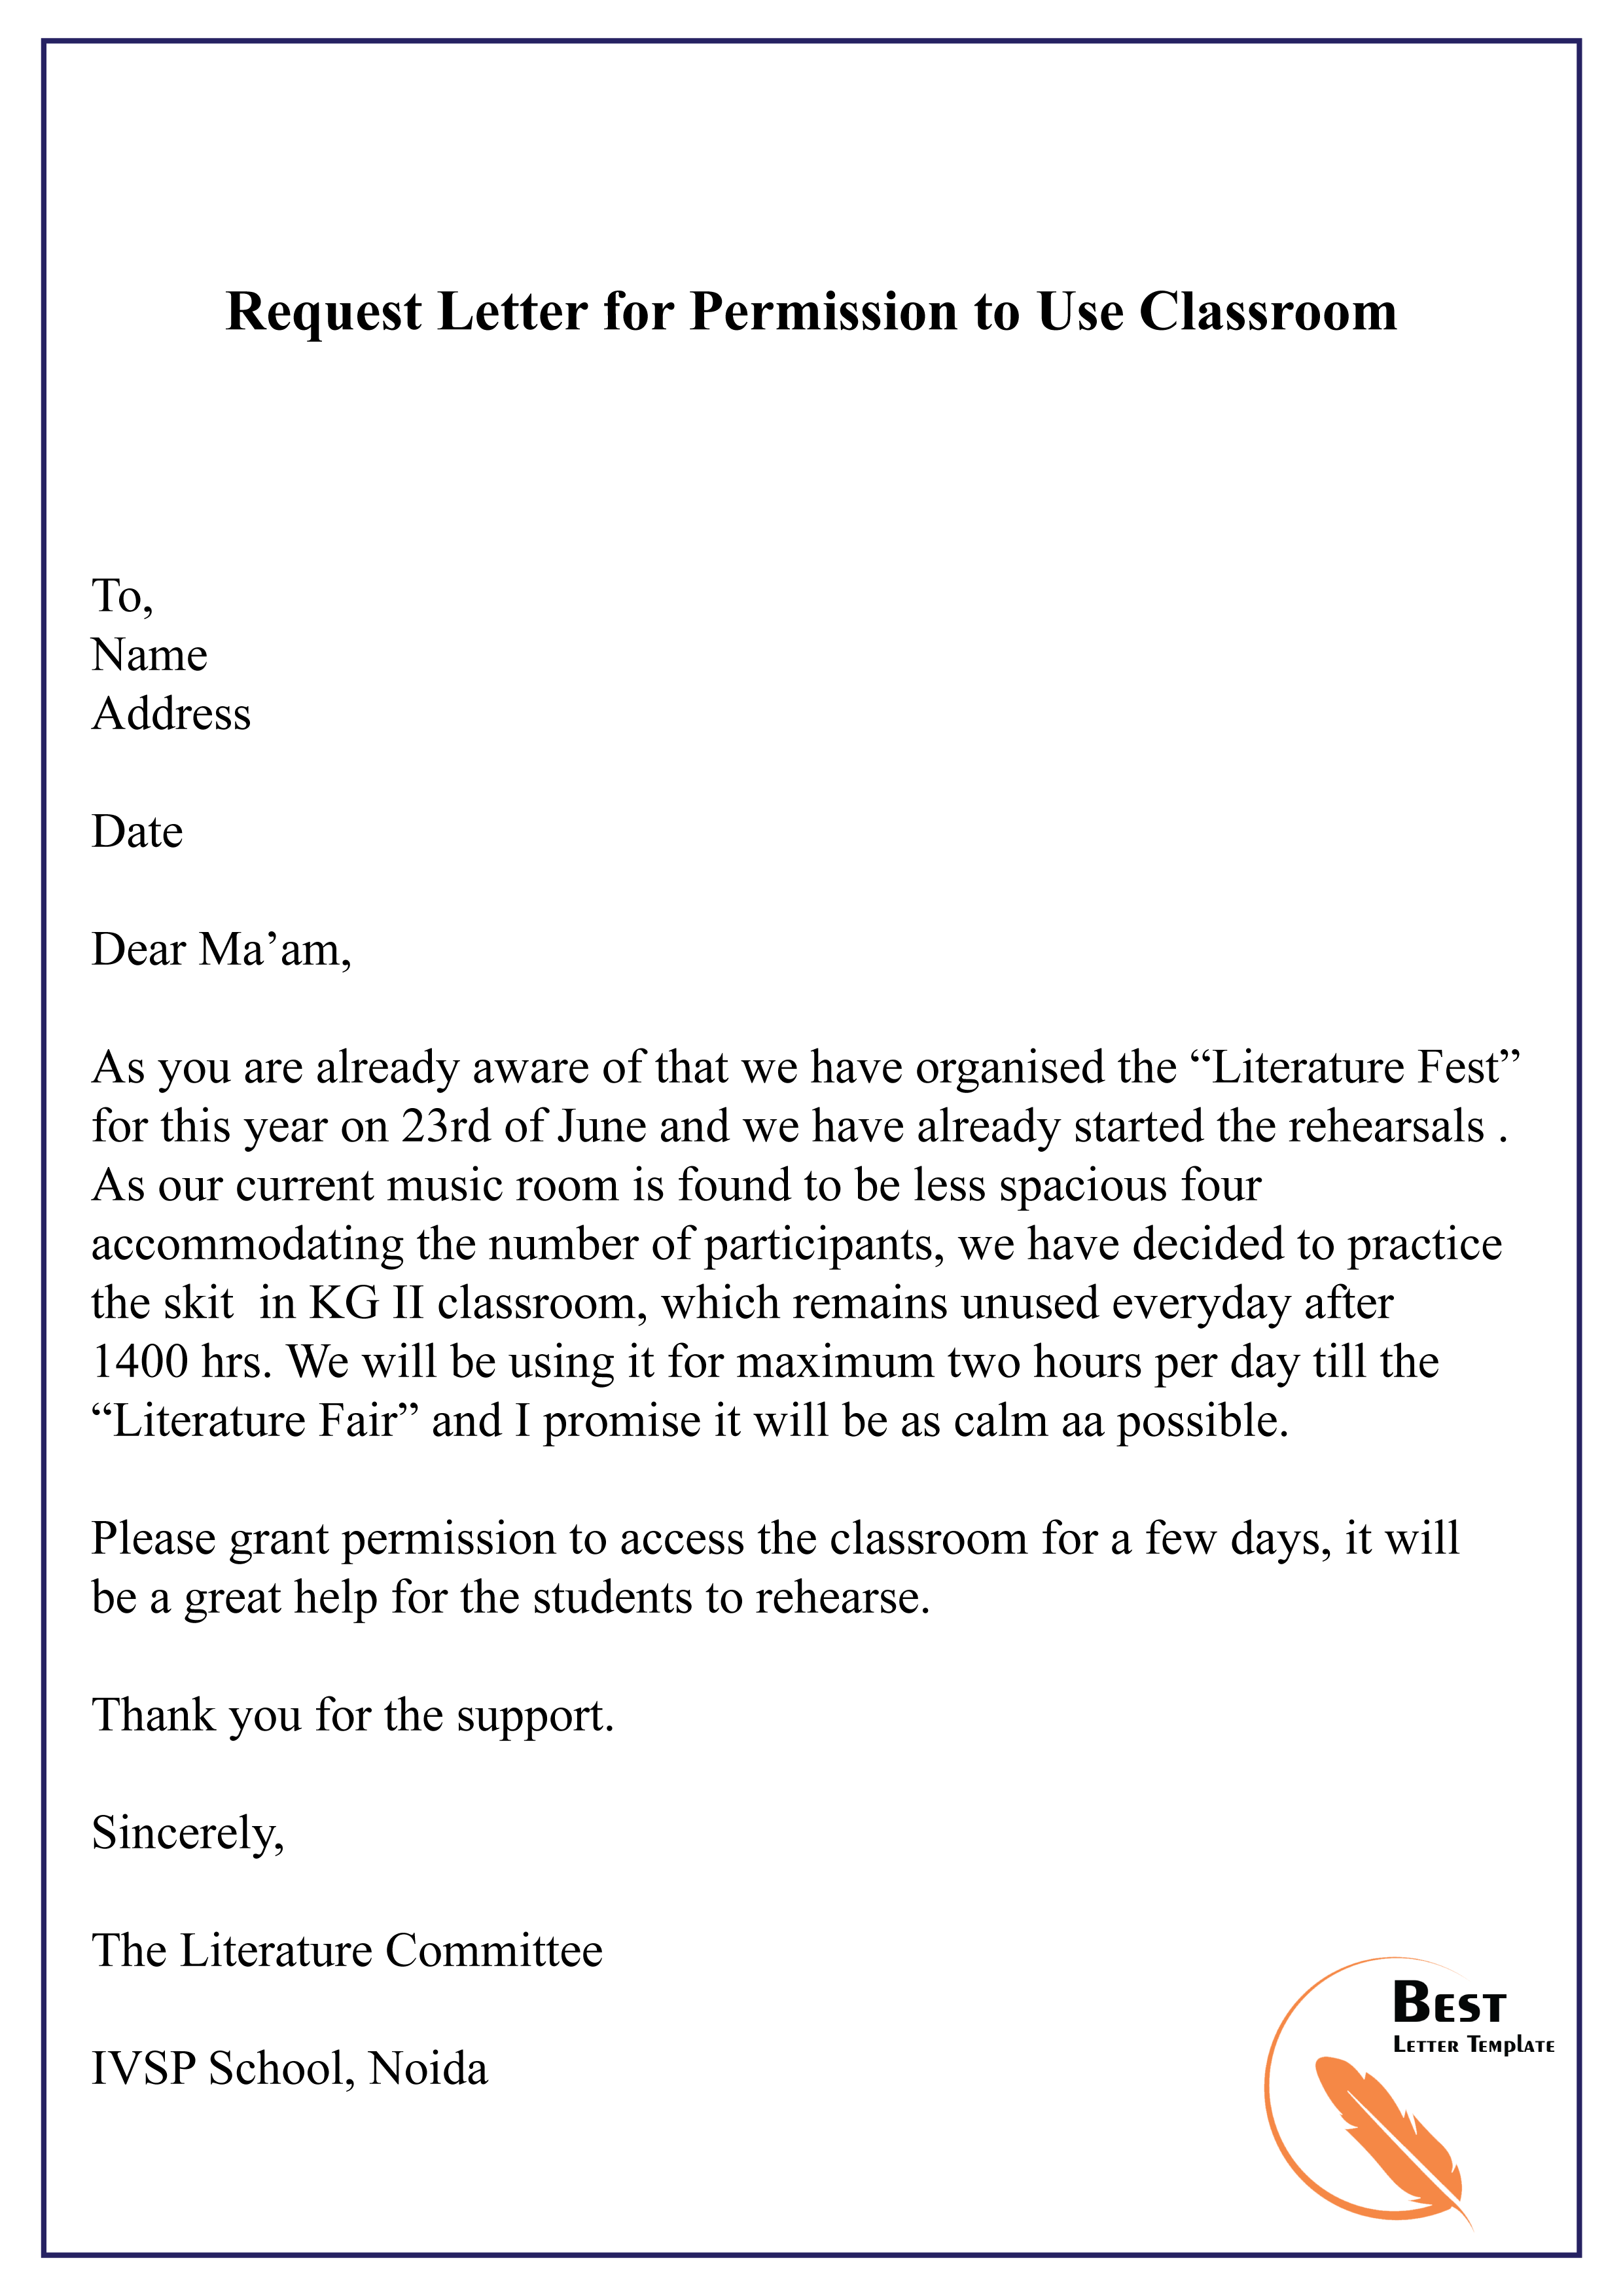 request-letter-for-permission-to-use-equipment-best-template-format